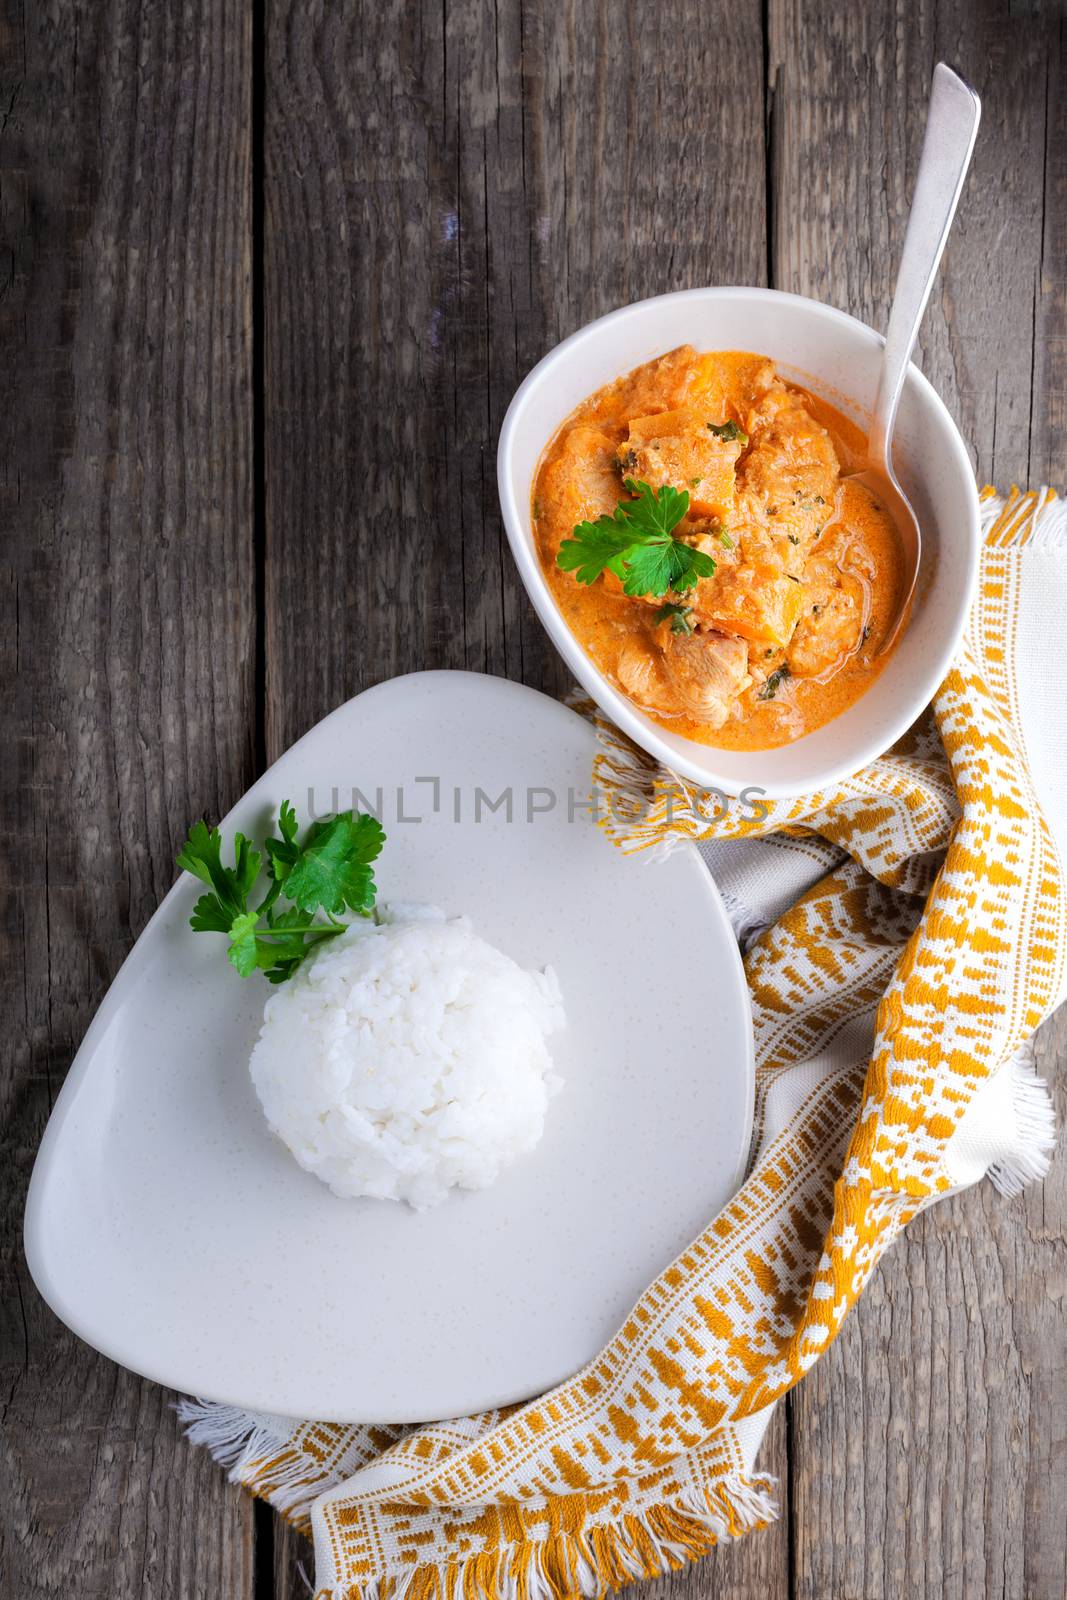 Chicken curry and rice by supercat67